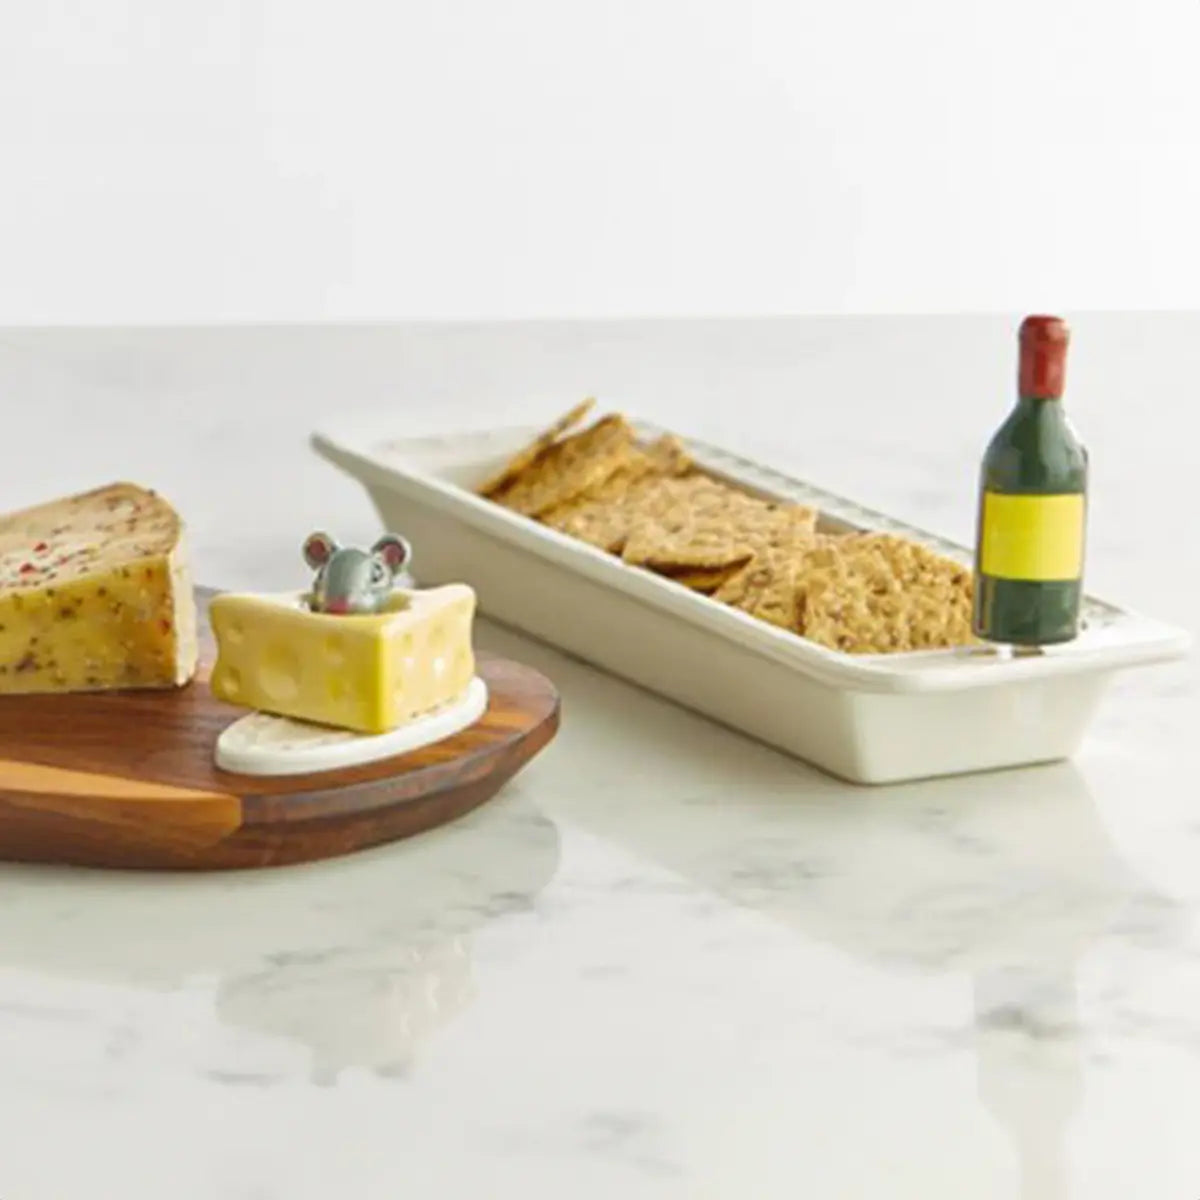 Nora Fleming Cheese Please Mini on a wood serving board in a room with food and another tray